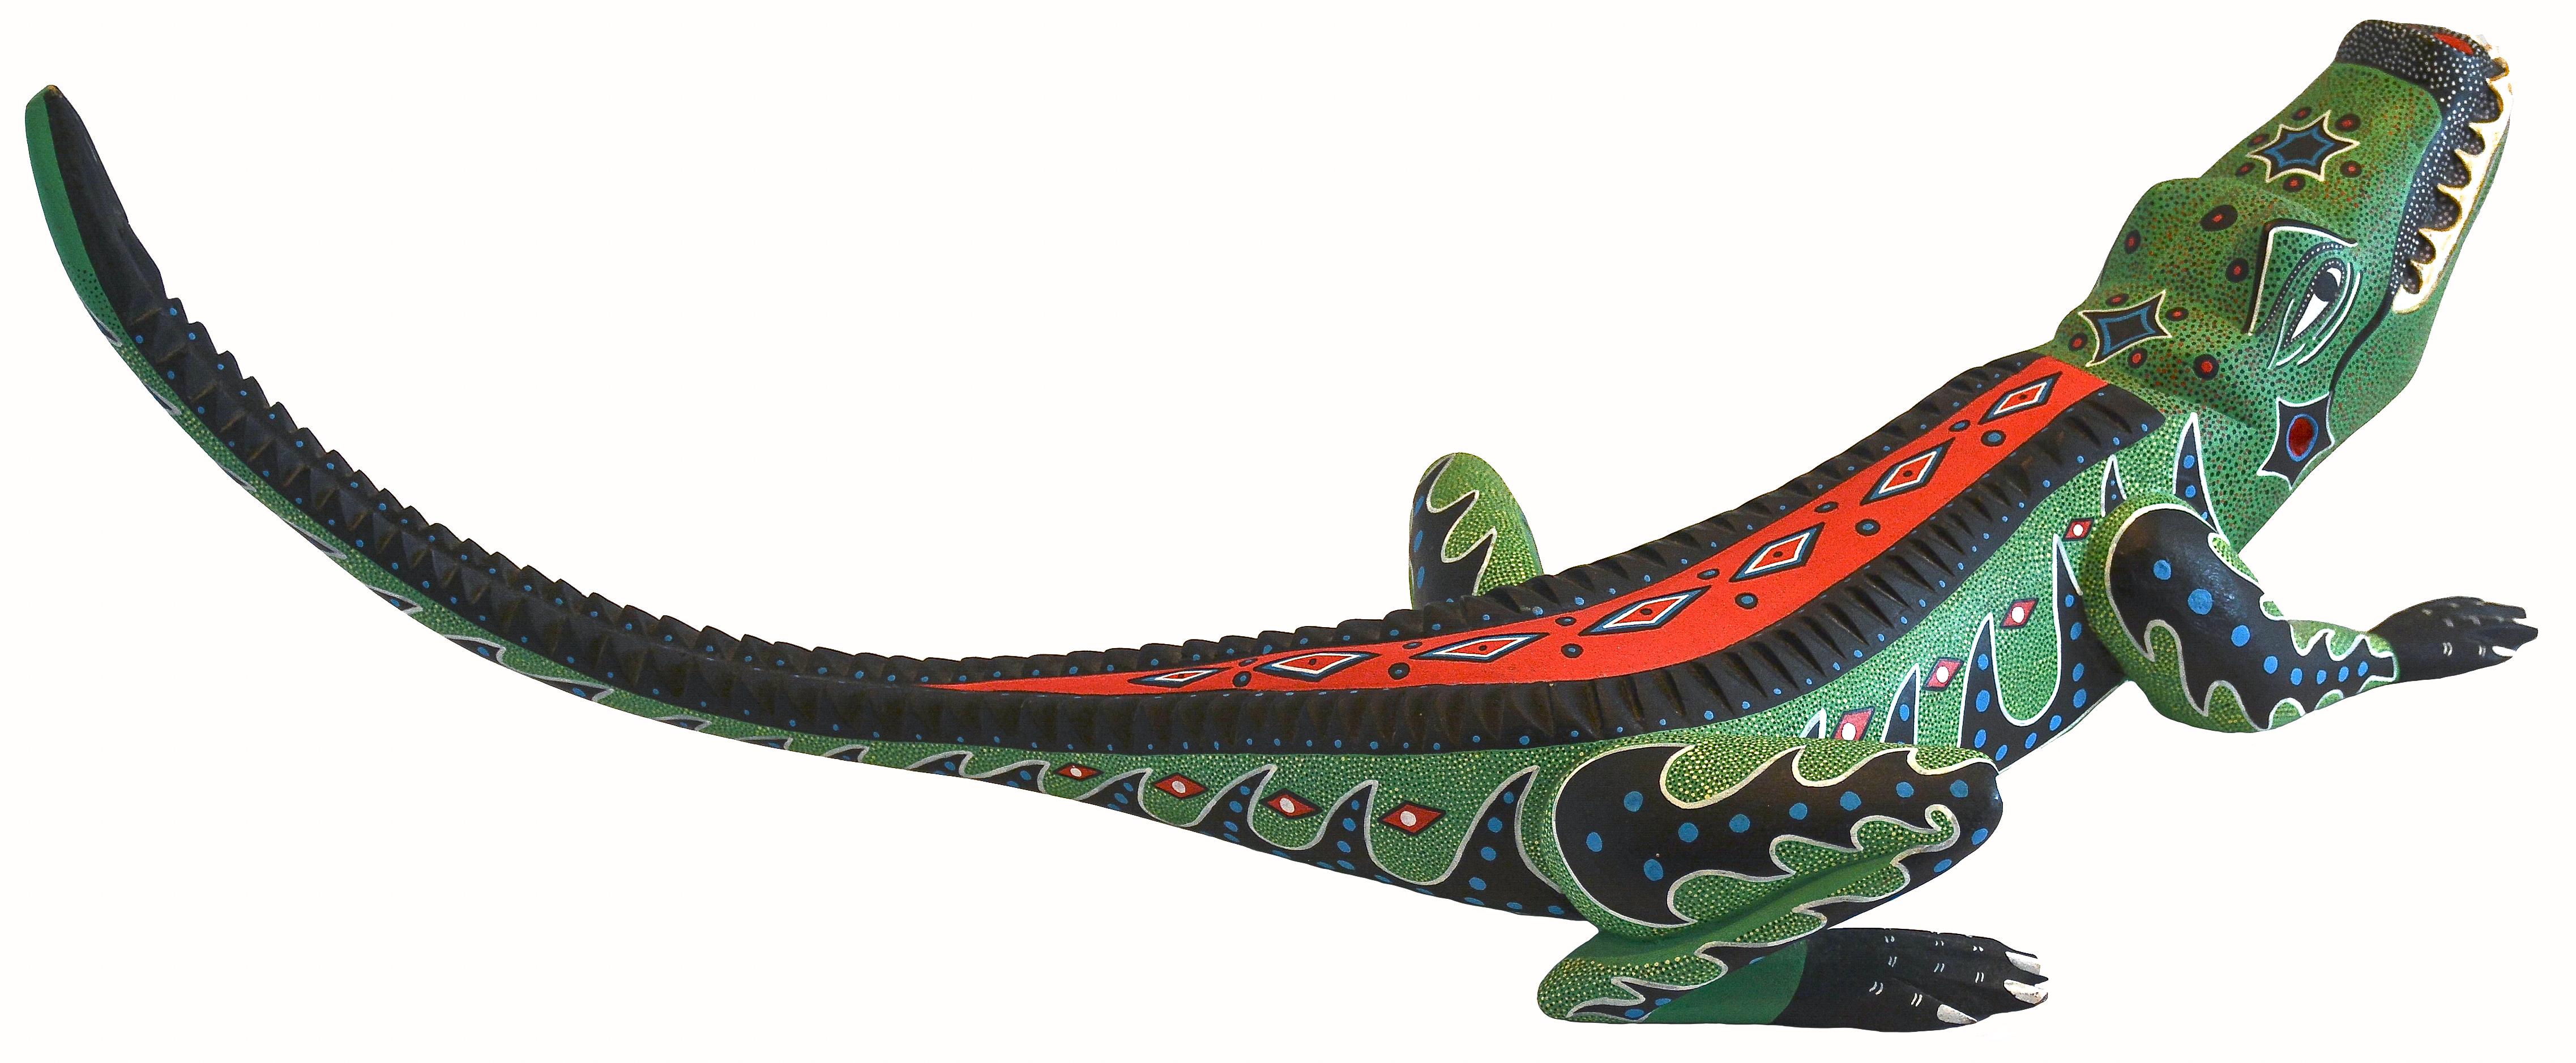 Alligator
1989
Gerardo Ramirez Morales
San Antonio Arrazola, Oaxaca, Mexico
Copal wood, acrylic paint
Signed
22.25 inches L. x 6.50 inches H. (at tail) x 8 inches W.

This amazing alligator is a rare vintage, near pristine exquisite example of